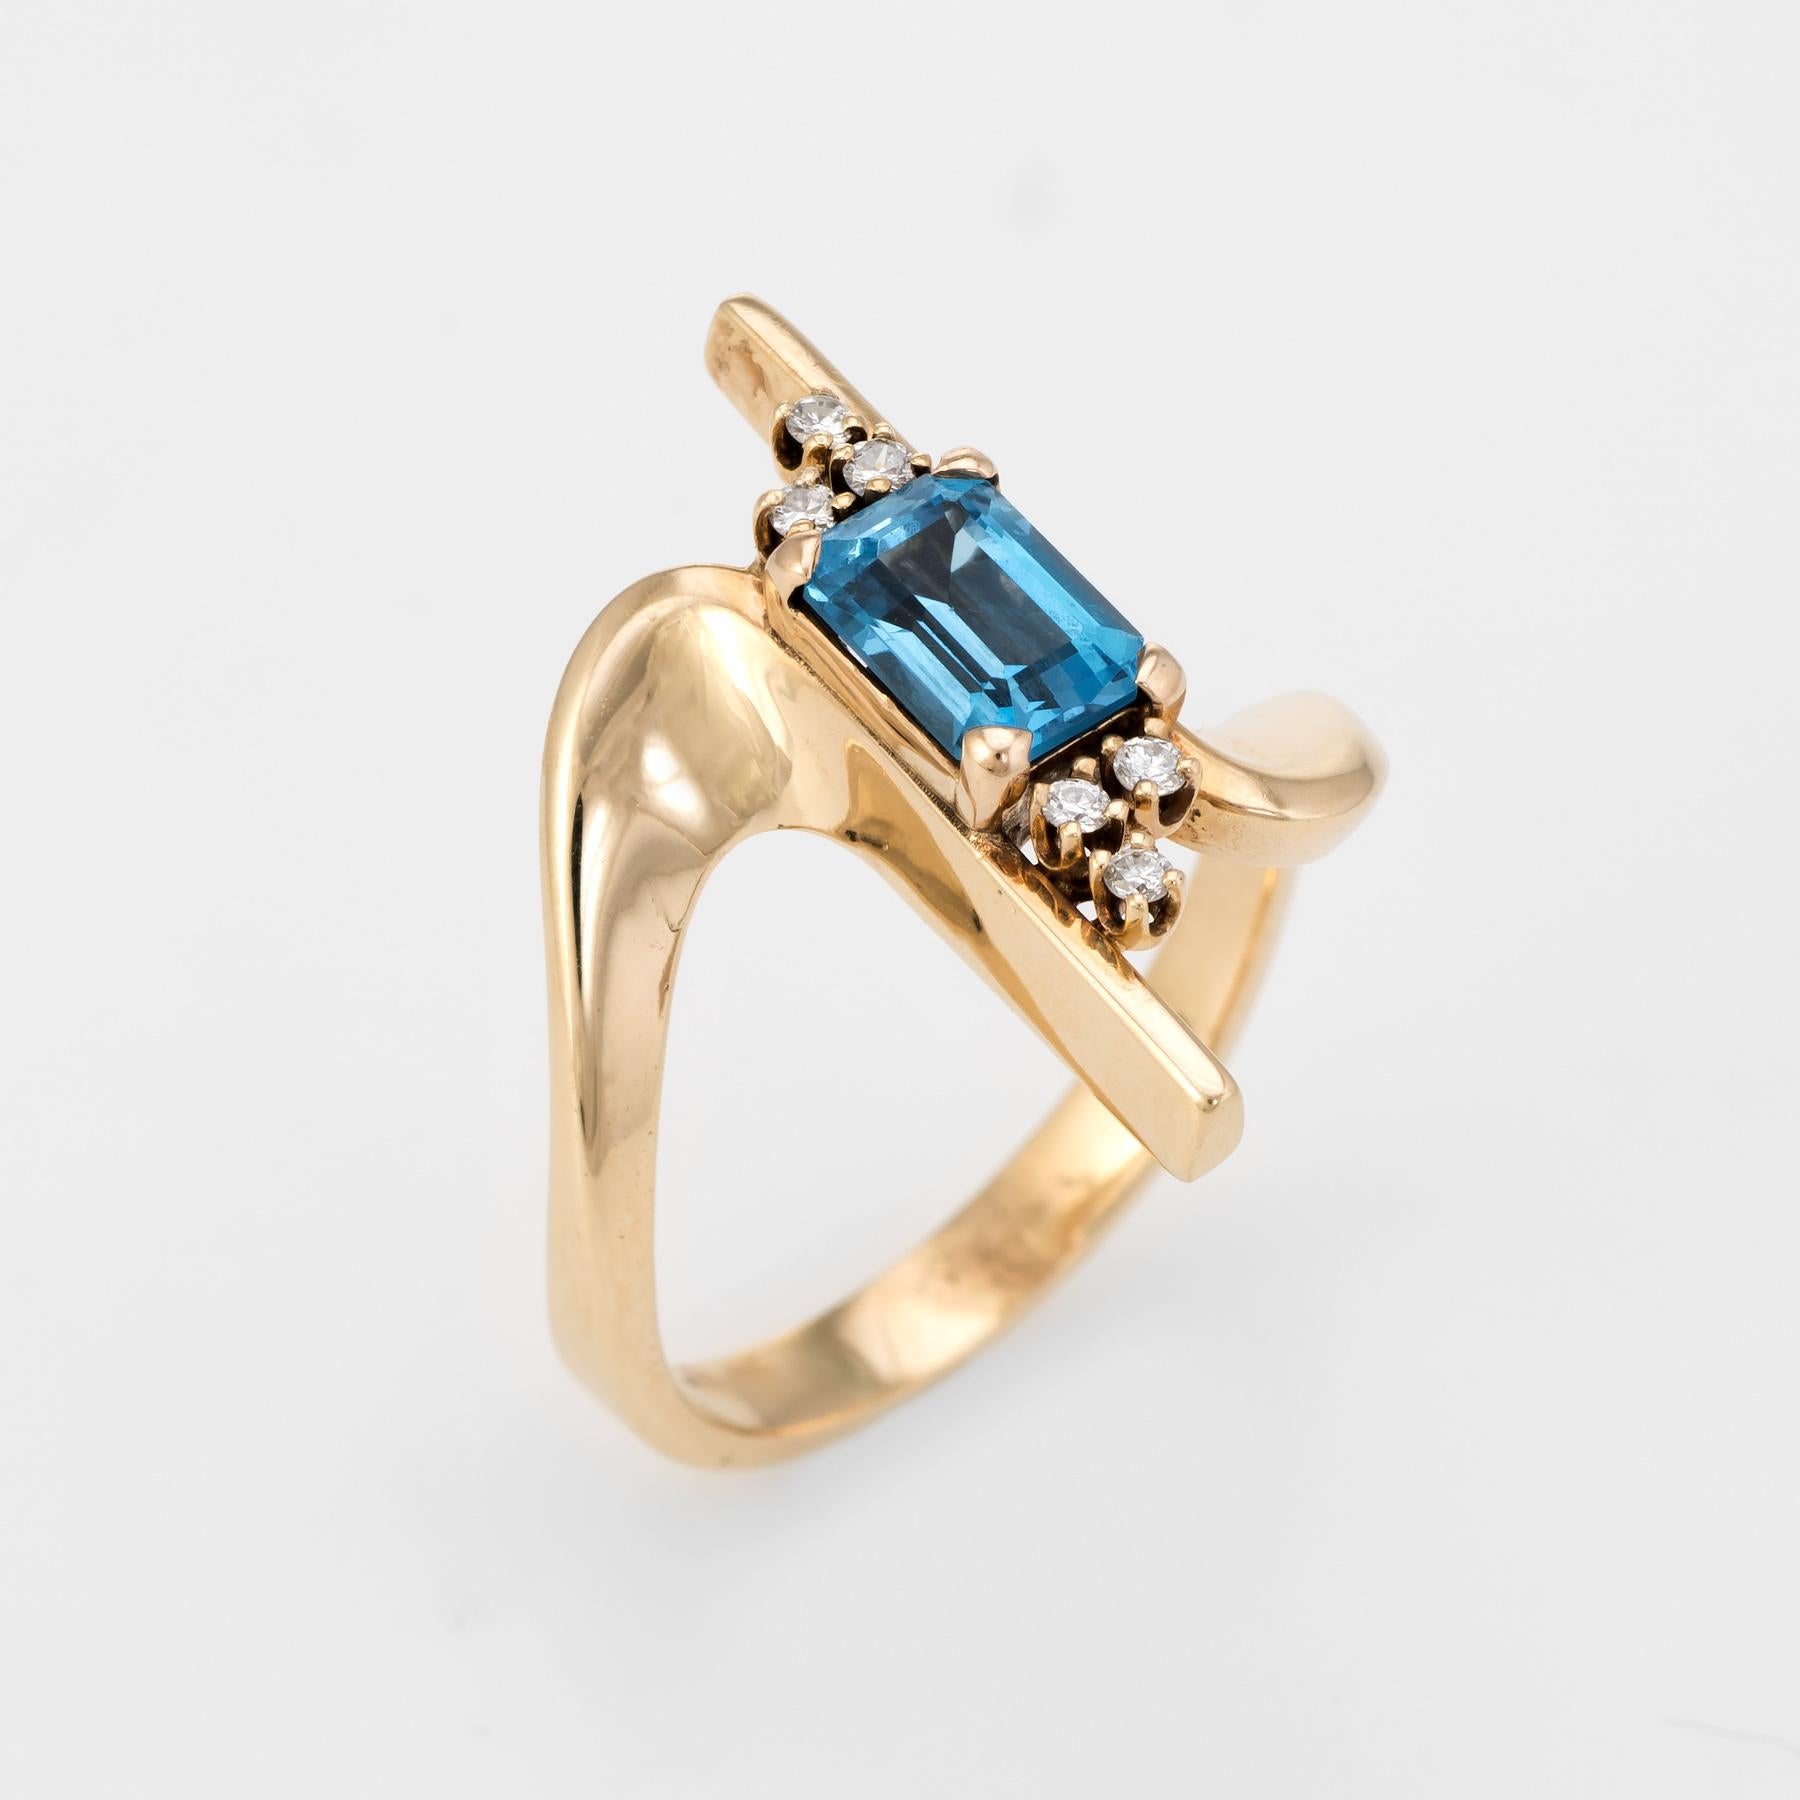 Distinct vintage cocktail ring (circa 1960s), crafted in 14 karat yellow gold. 

Emerald cut blue topaz measures 8mm x 5mm (estimated at 1.50 carats), accented with an estimated 0.12 carats of diamonds (estimated at H-I color and SI2-I1 clarity).